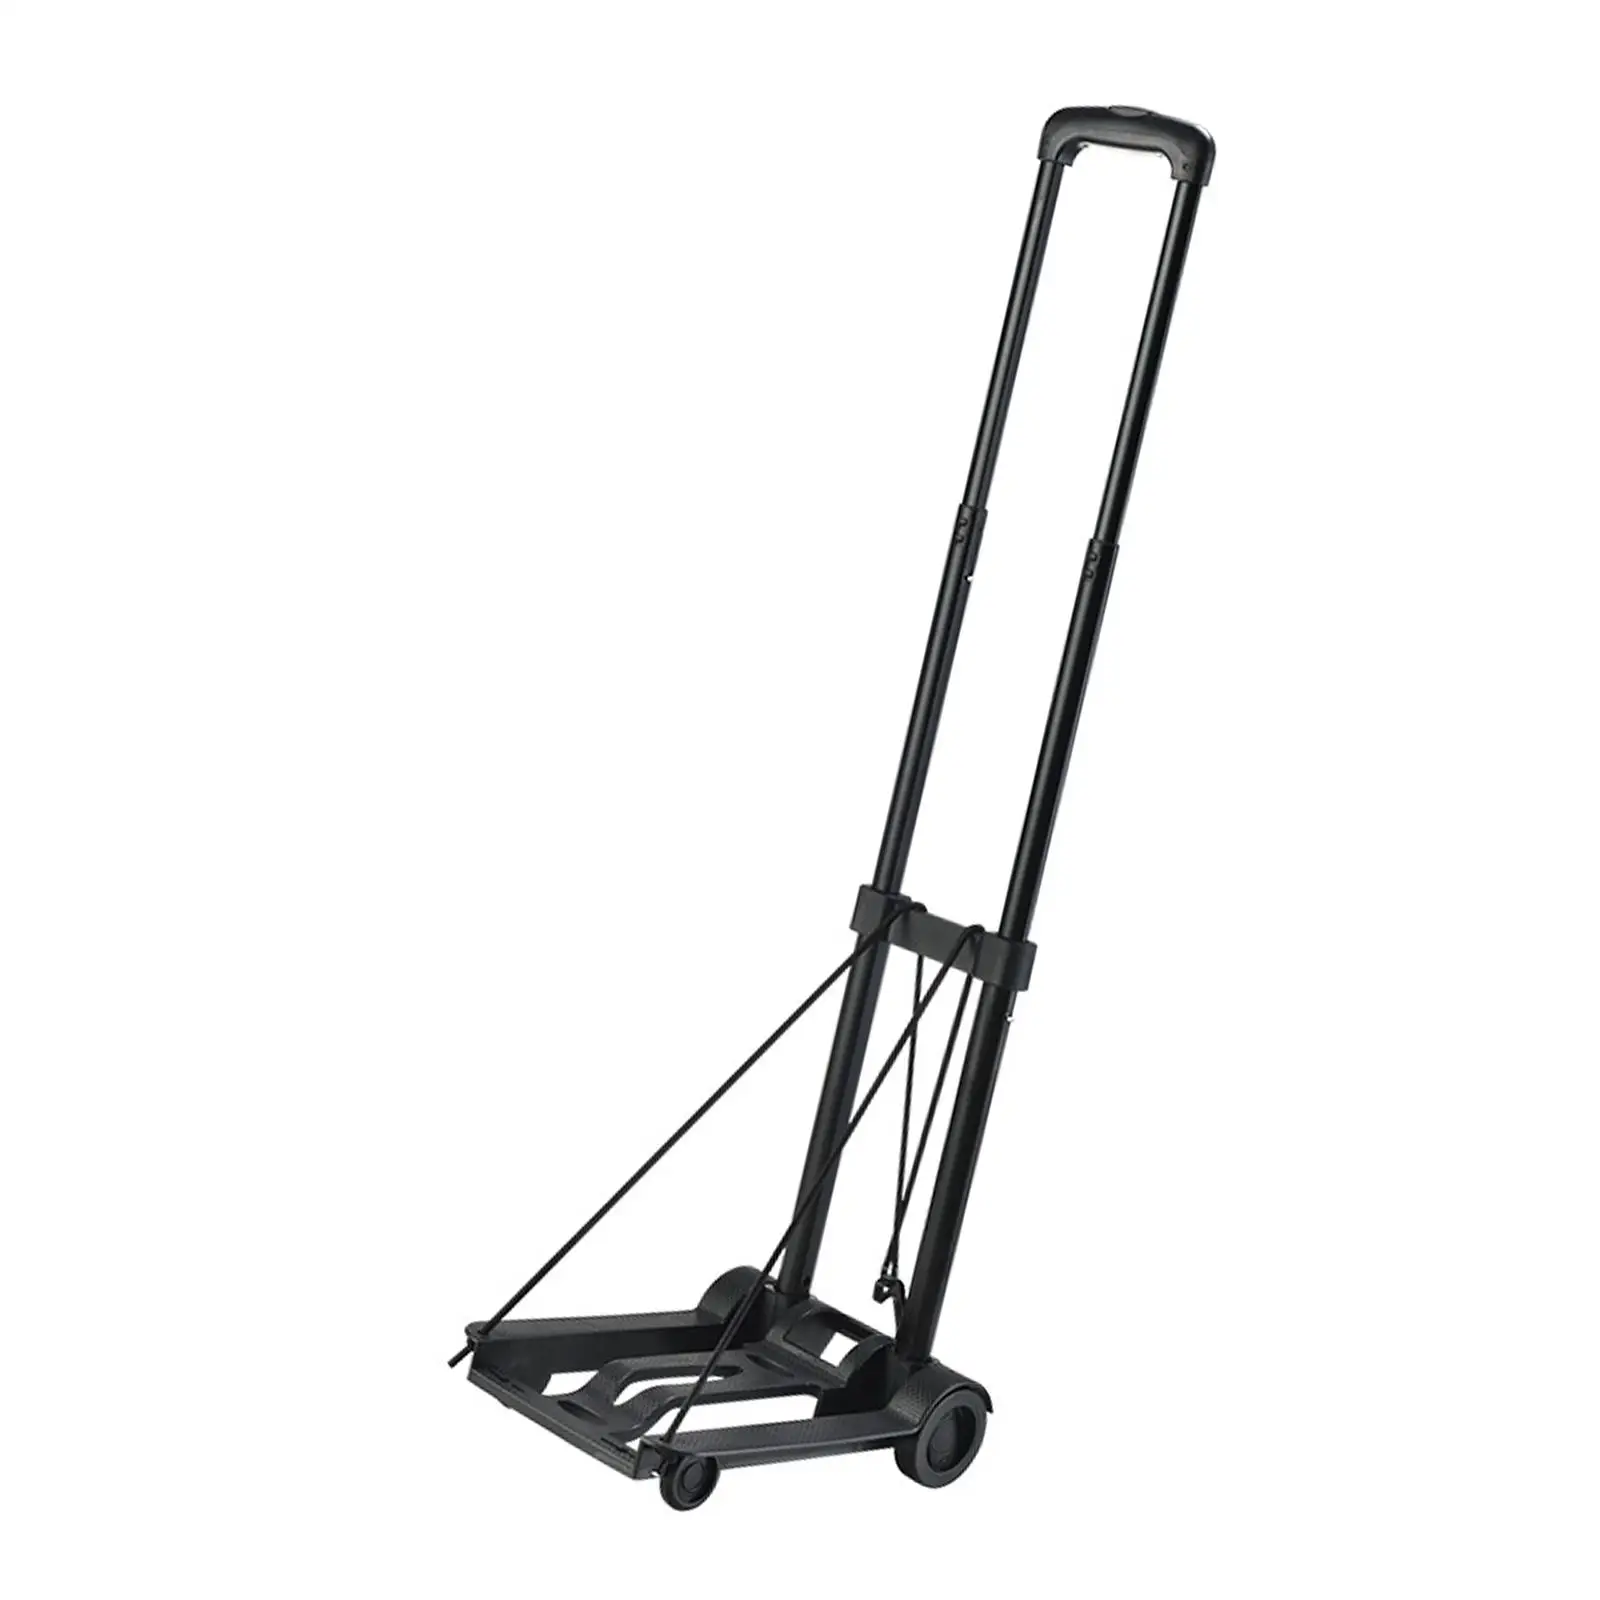 Max 40kg/88lbs Luggage Trolley Cart |#Portable Carrier Folding Hand Truck for Moving Traveling Outdoor Carrying Indoor